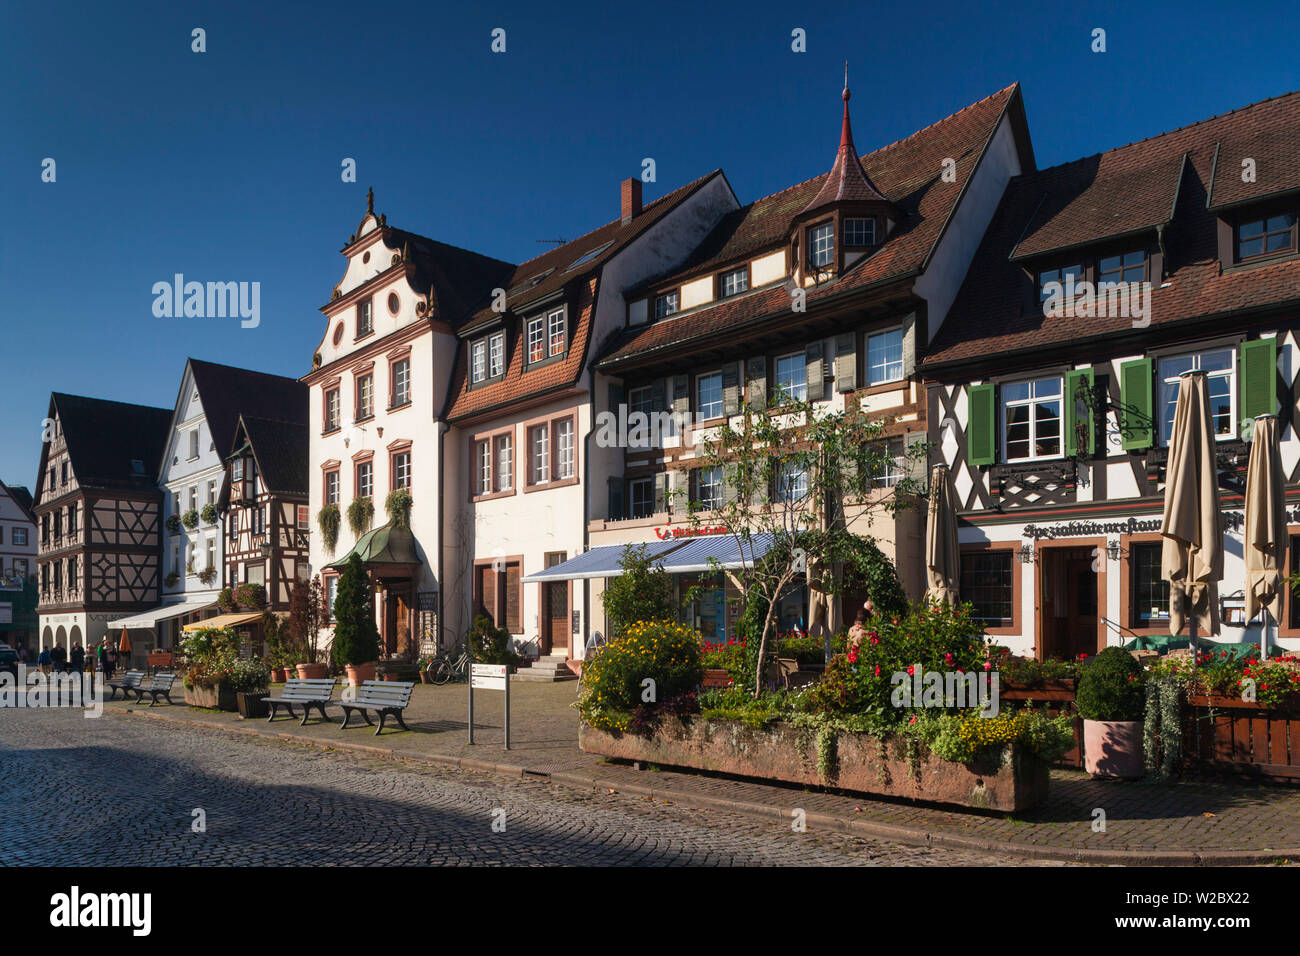 Germany, Baden-Wurttemburg, Black Forest, Gengenbach, town buildings Stock Photo